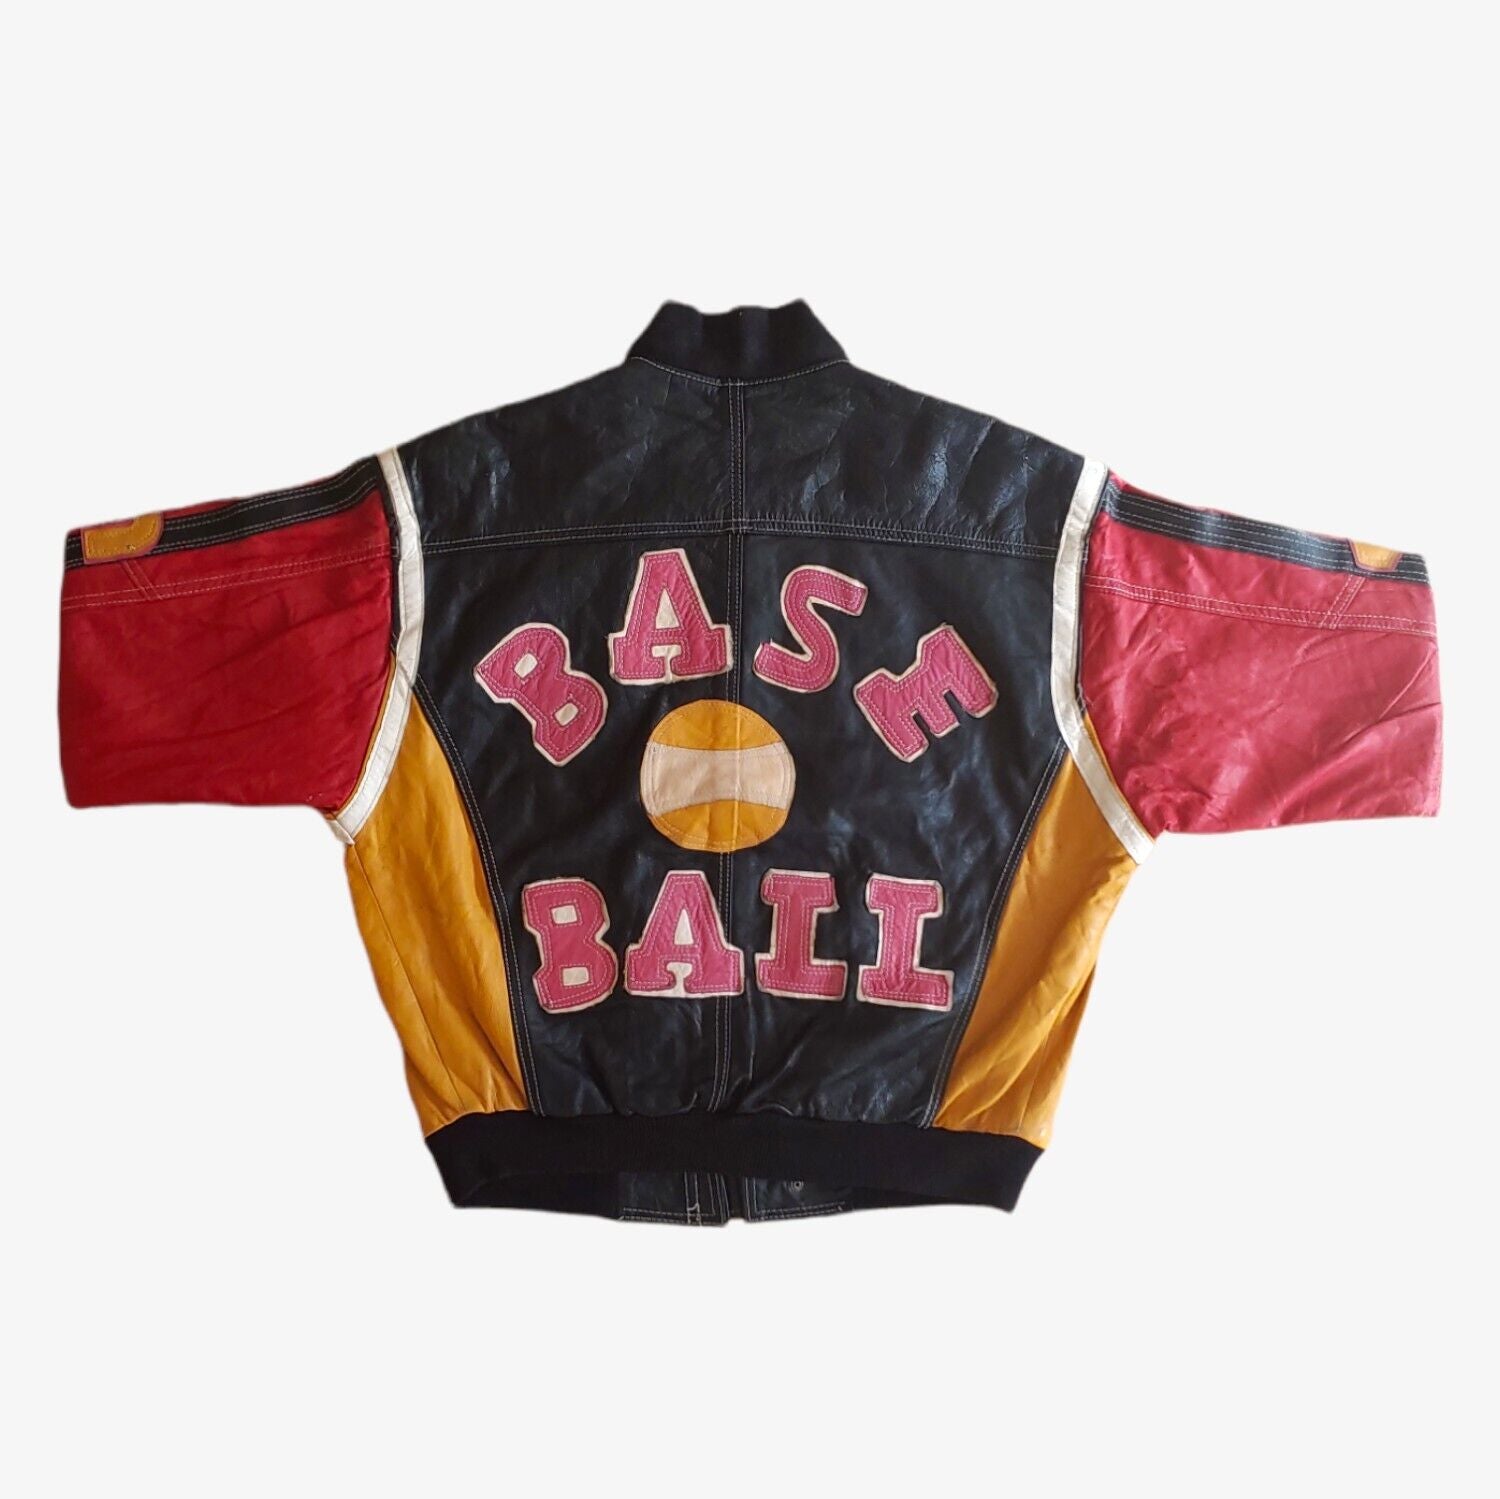 Vintage 90s Baseball Embroidered Spell Out Colourful Leather Varsity Jacket With Big Back Motif Back - Casspios Dream